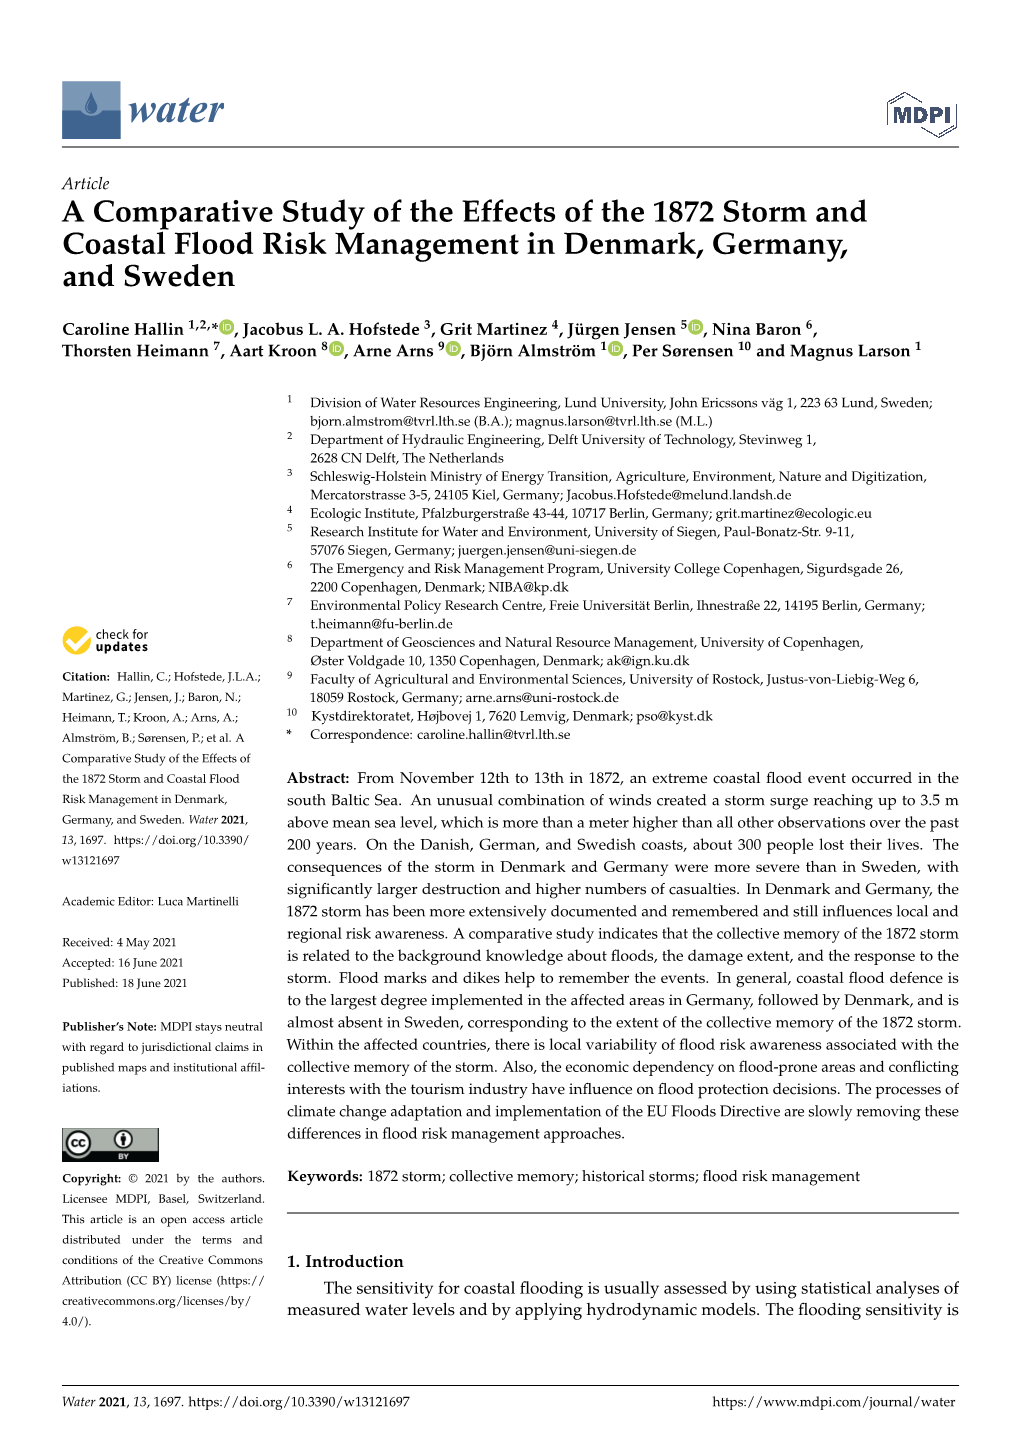 A Comparative Study of the Effects of the 1872 Storm and Coastal Flood Risk Management in Denmark, Germany, and Sweden